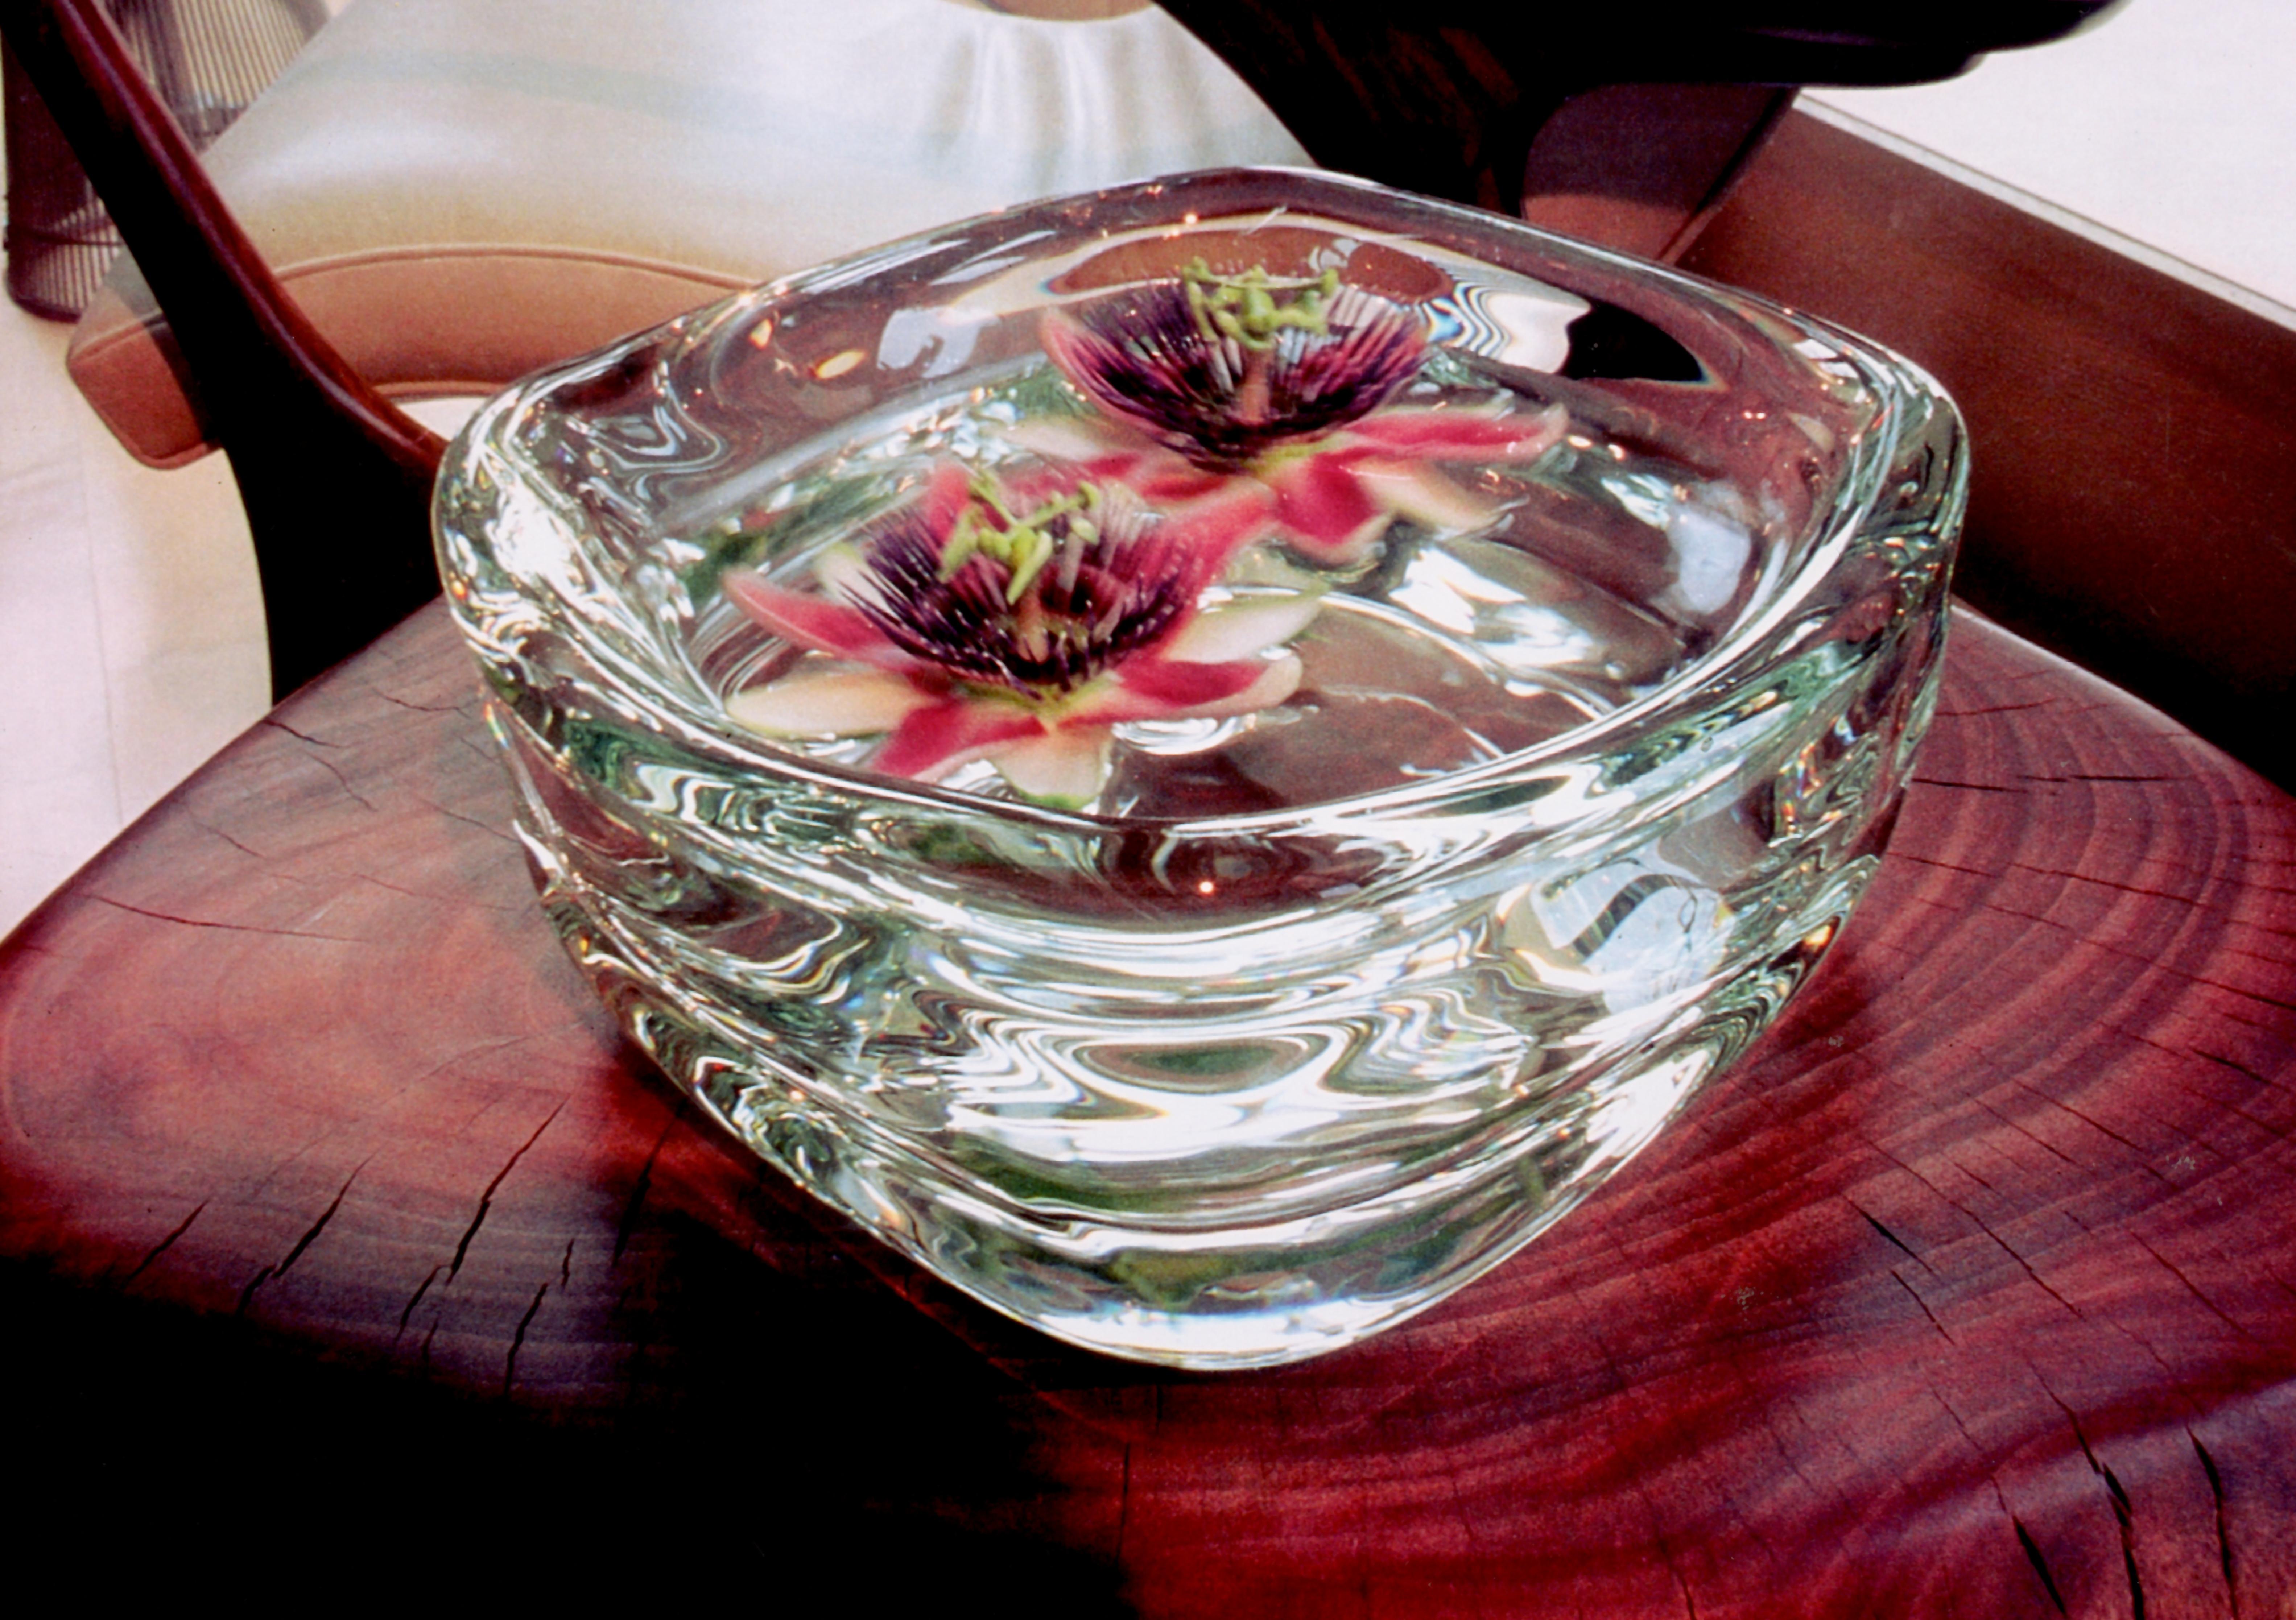 Modern glass bowl • Clear Happy bowl by Siemon & Salazar
Measures: 5” T x 8” W. Each piece is handmade to order.

These works are a departure from the careful shapes of the banded vessels. They are reminiscent of another era and play with the